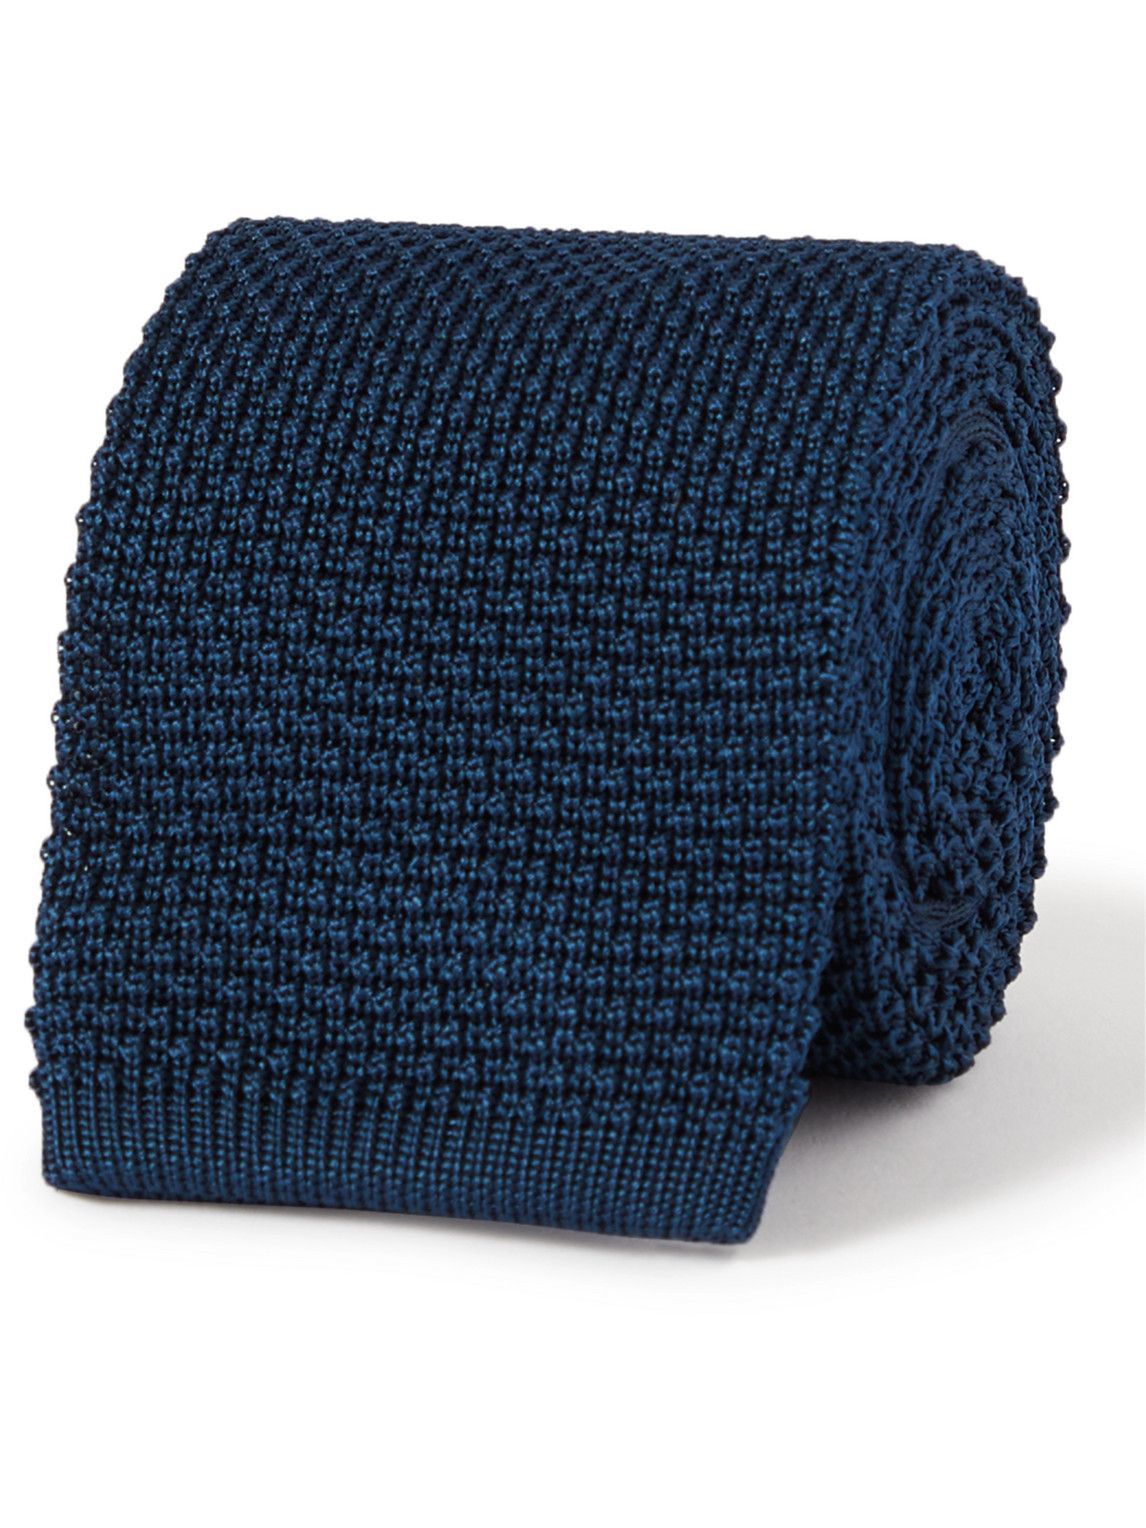 Anderson & Sheppard - 6cm Knitted Silk Tie Anderson & Sheppard